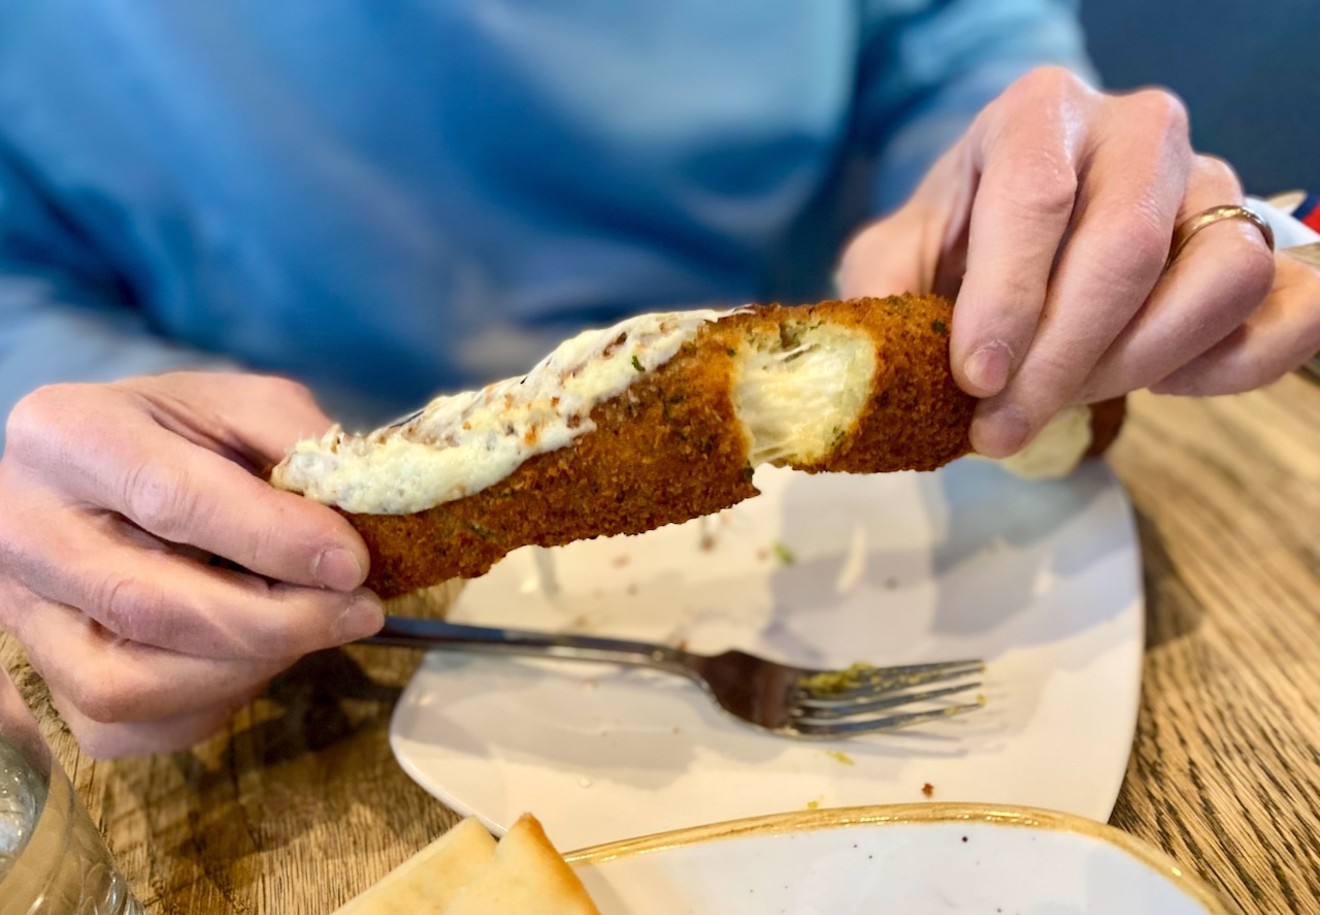 Happiest Hour's foot-long mozzarella sticks come in orders of five, so bring friends.